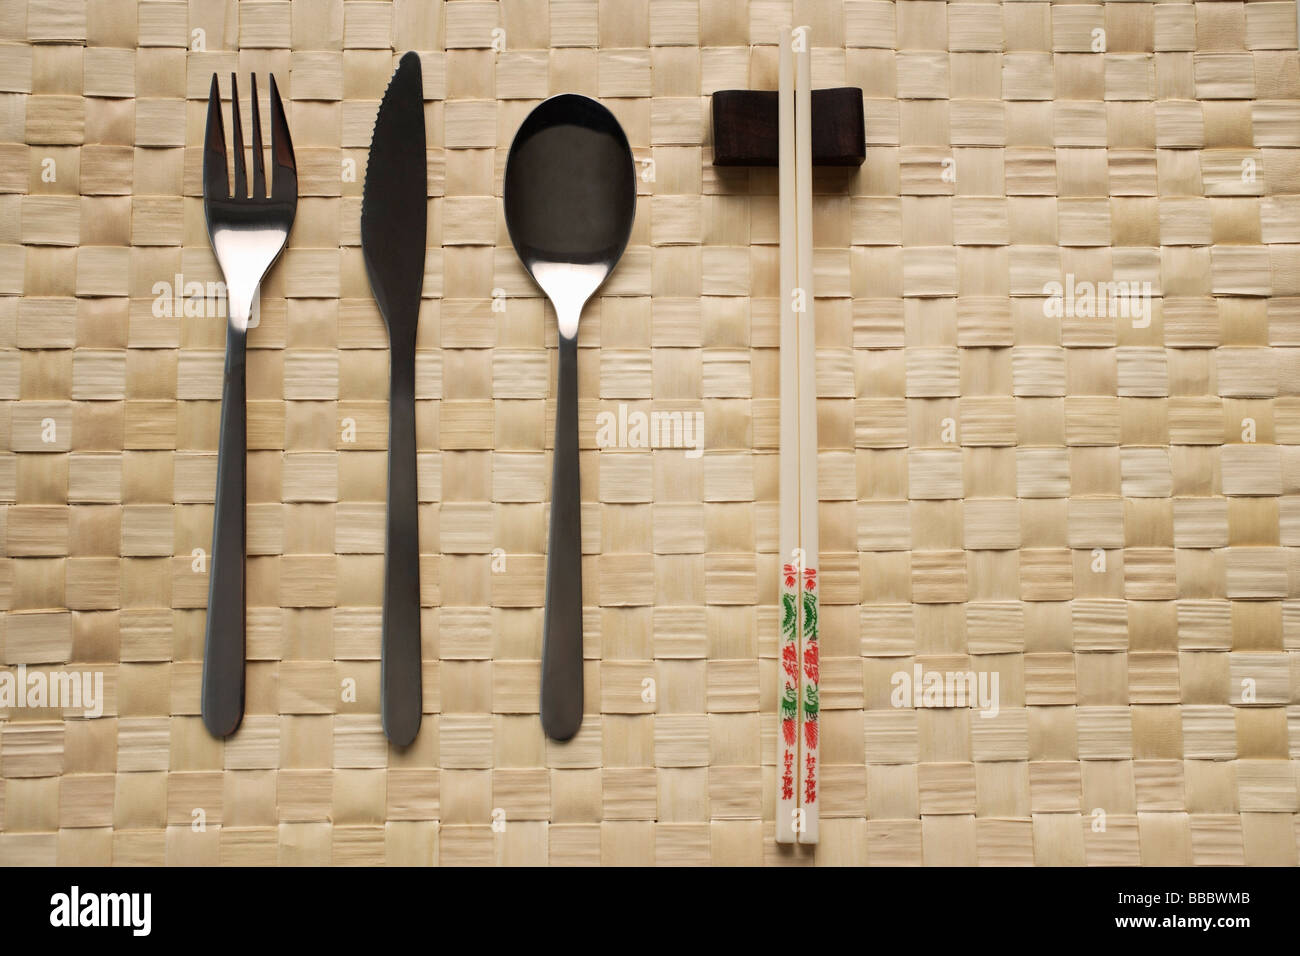 fork, knife, spoon and chopstick dinner setting Stock Photo